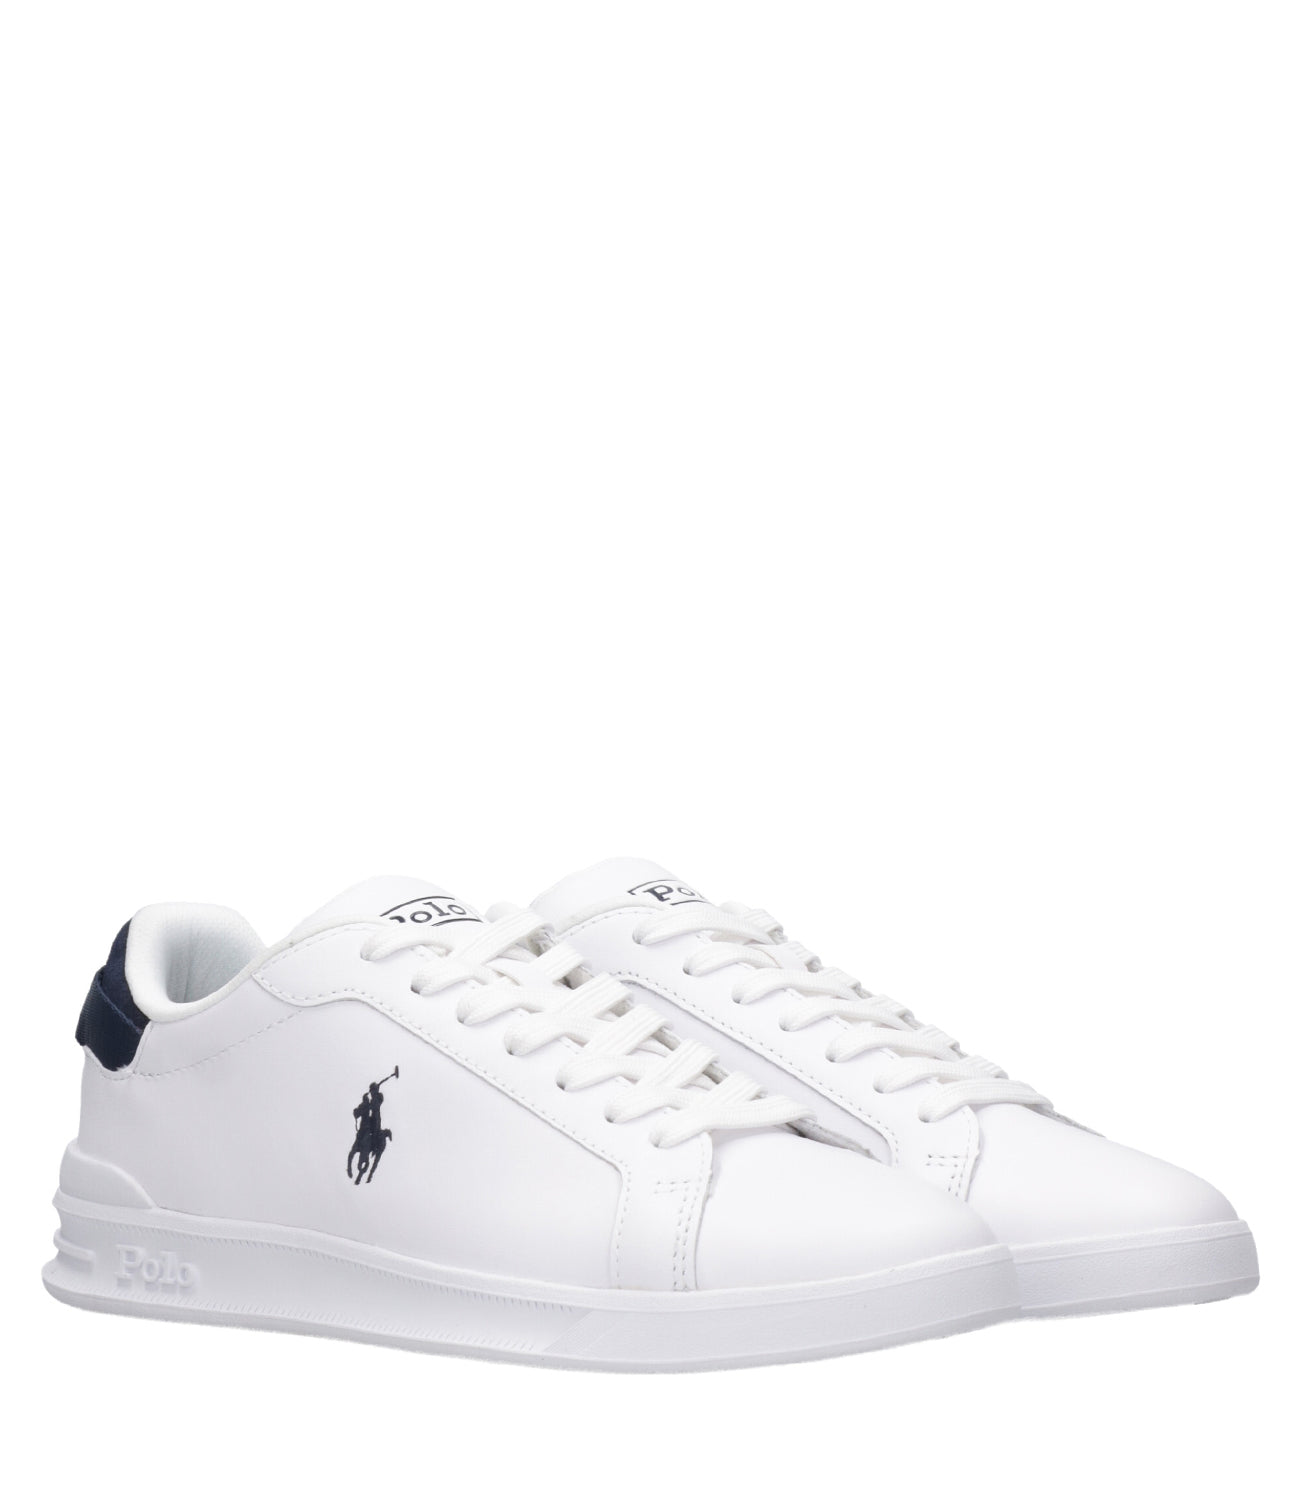 Polo Ralph Lauren | Heritage Court II Sneaker White and Blue